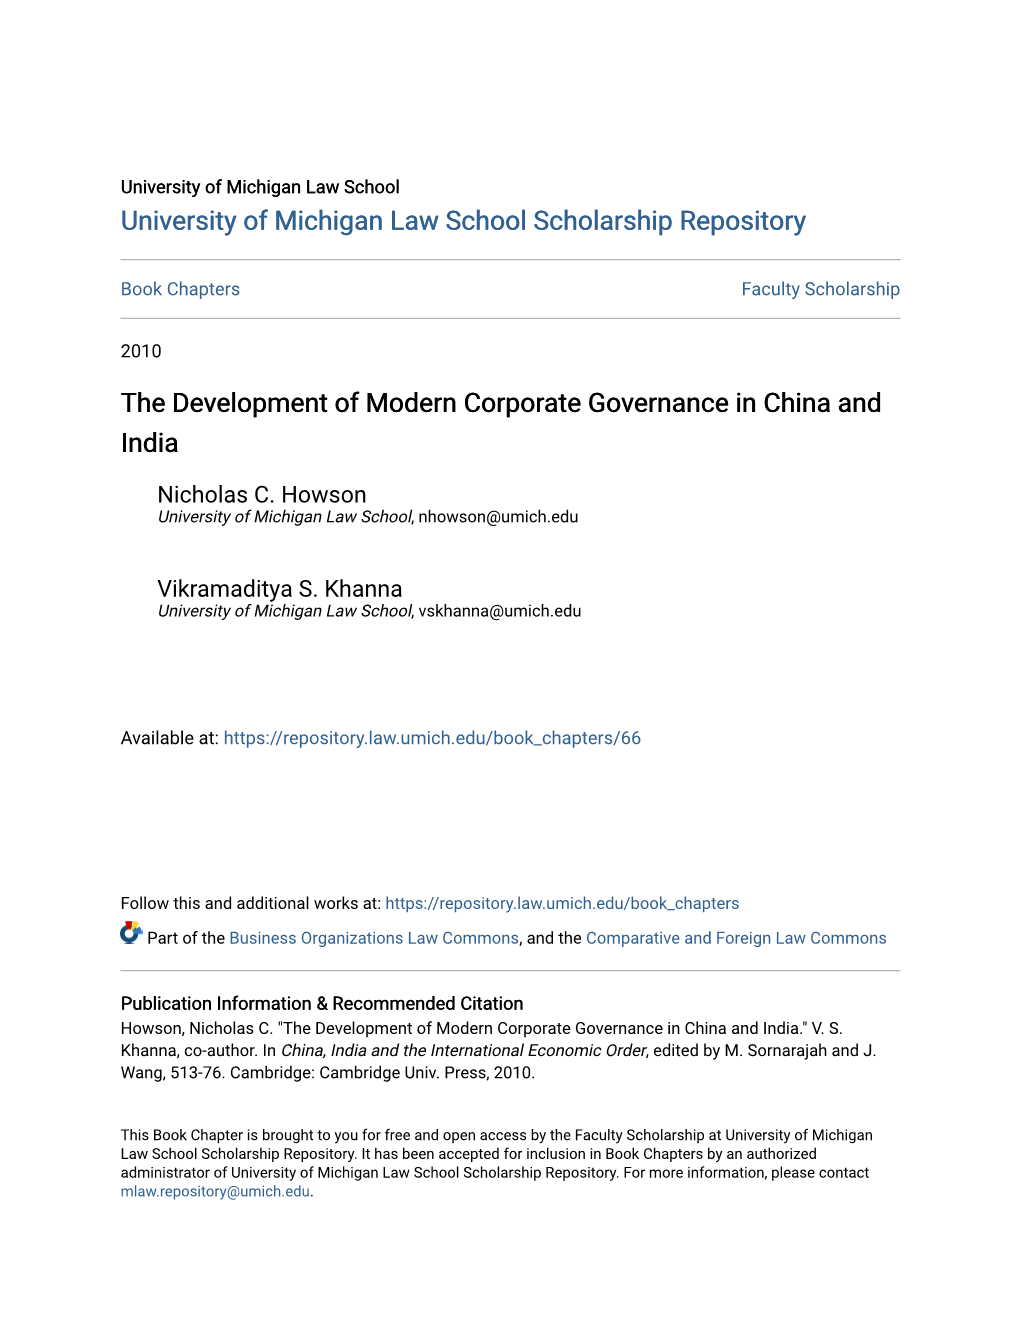 The Development of Modern Corporate Governance in China and India